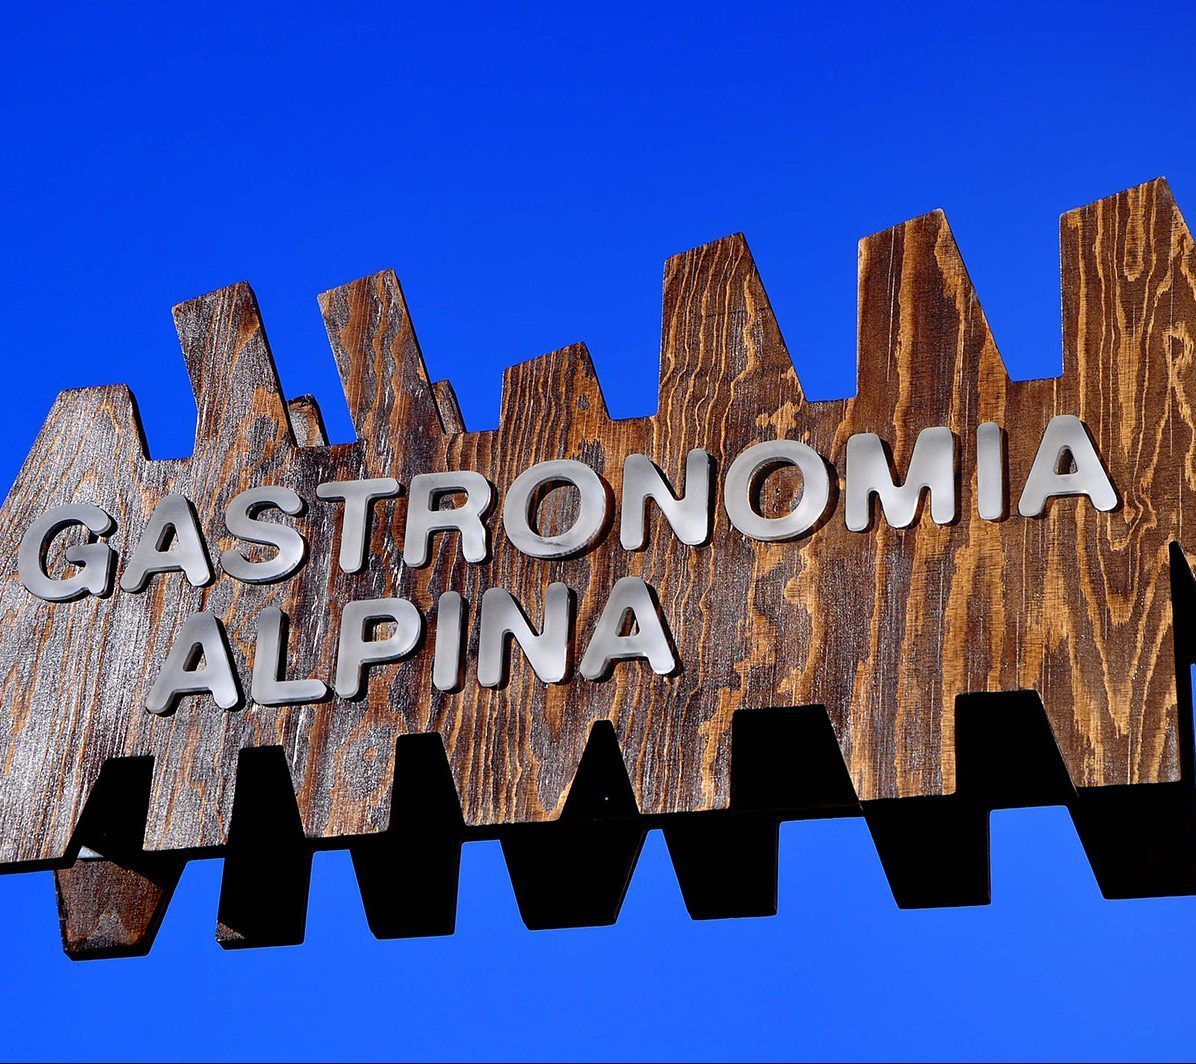 Gastronomia Alpina detail designed by ARtes Group International